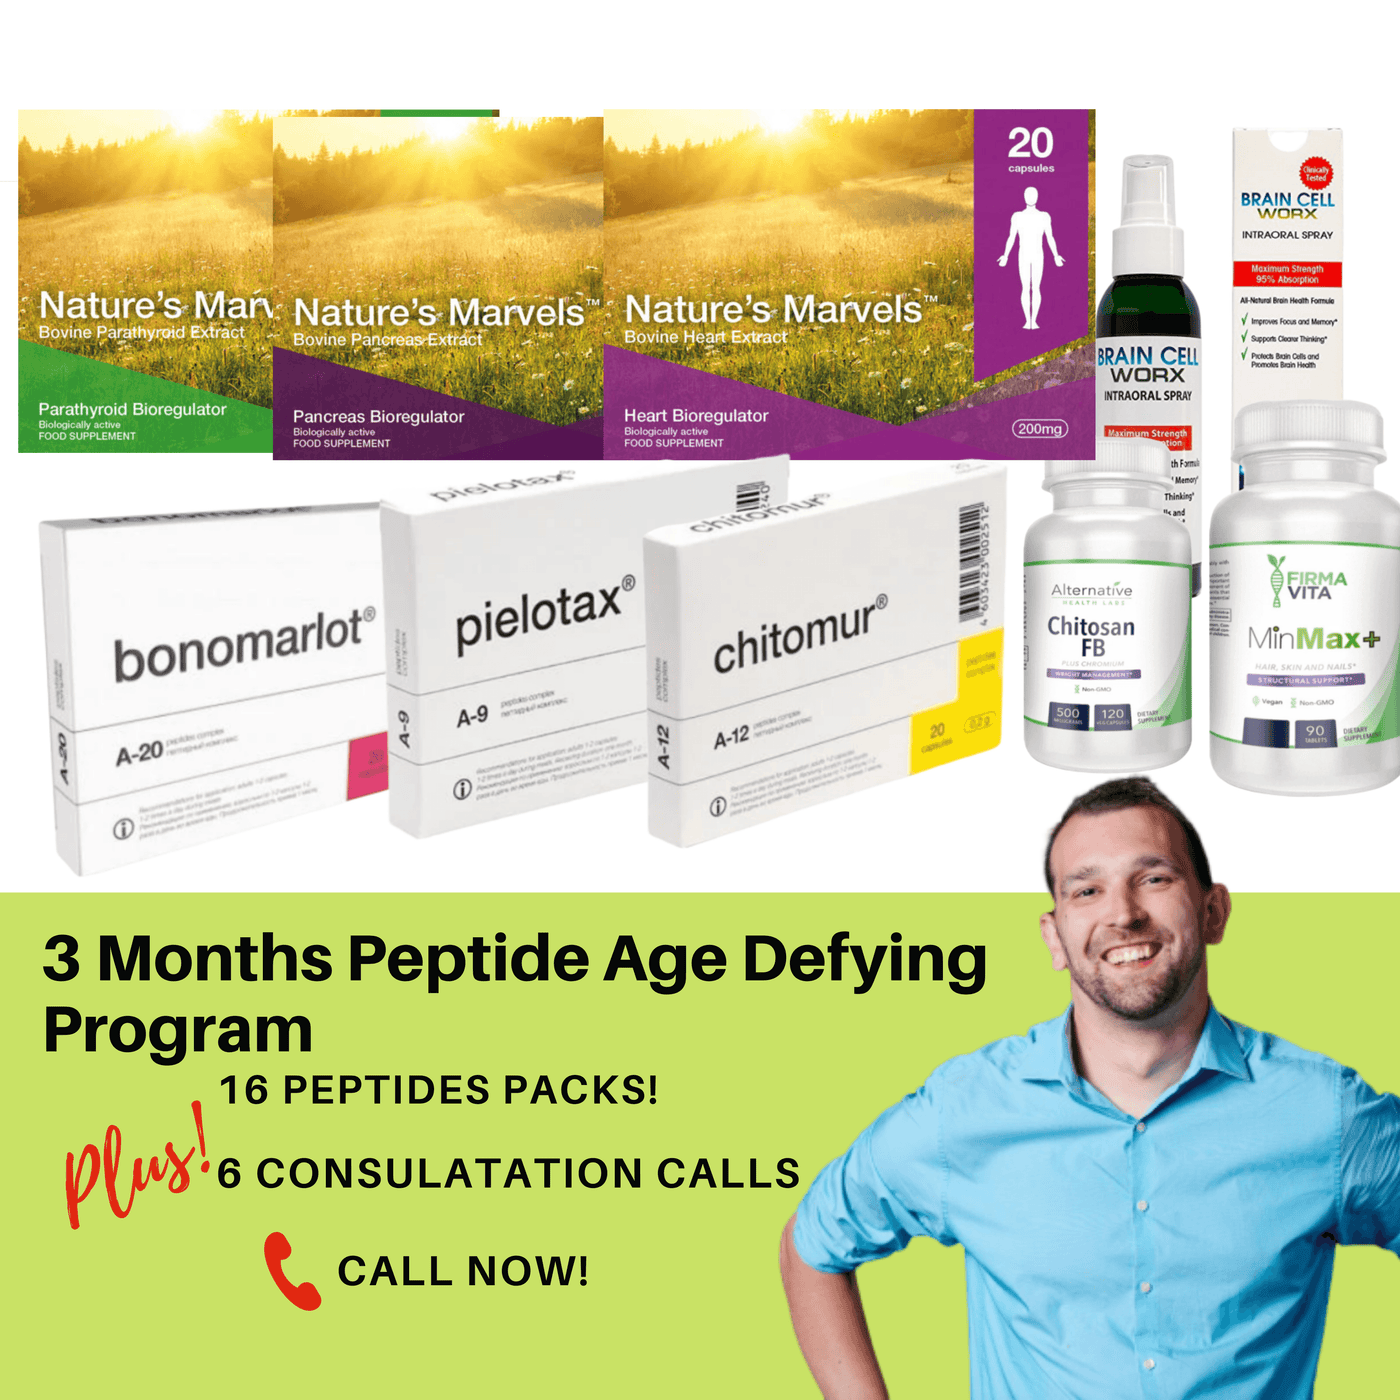 Highway to Health - 3 Month Age Defying Program (16 Peptides Included)